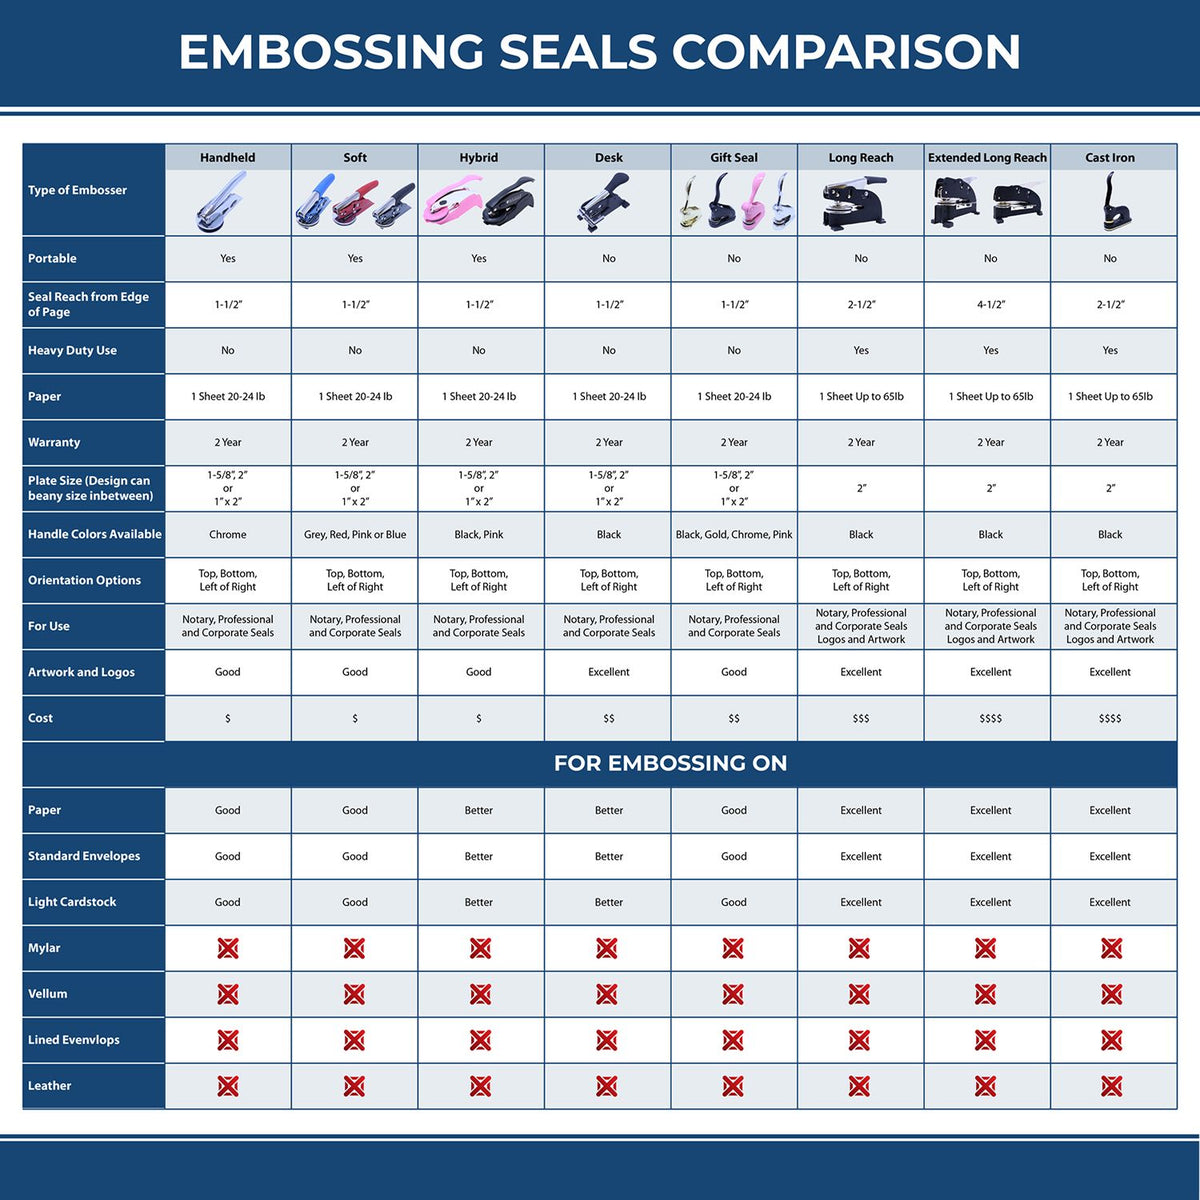 A comparison chart for the different types of mount models available for the Long Reach Idaho PE Seal.